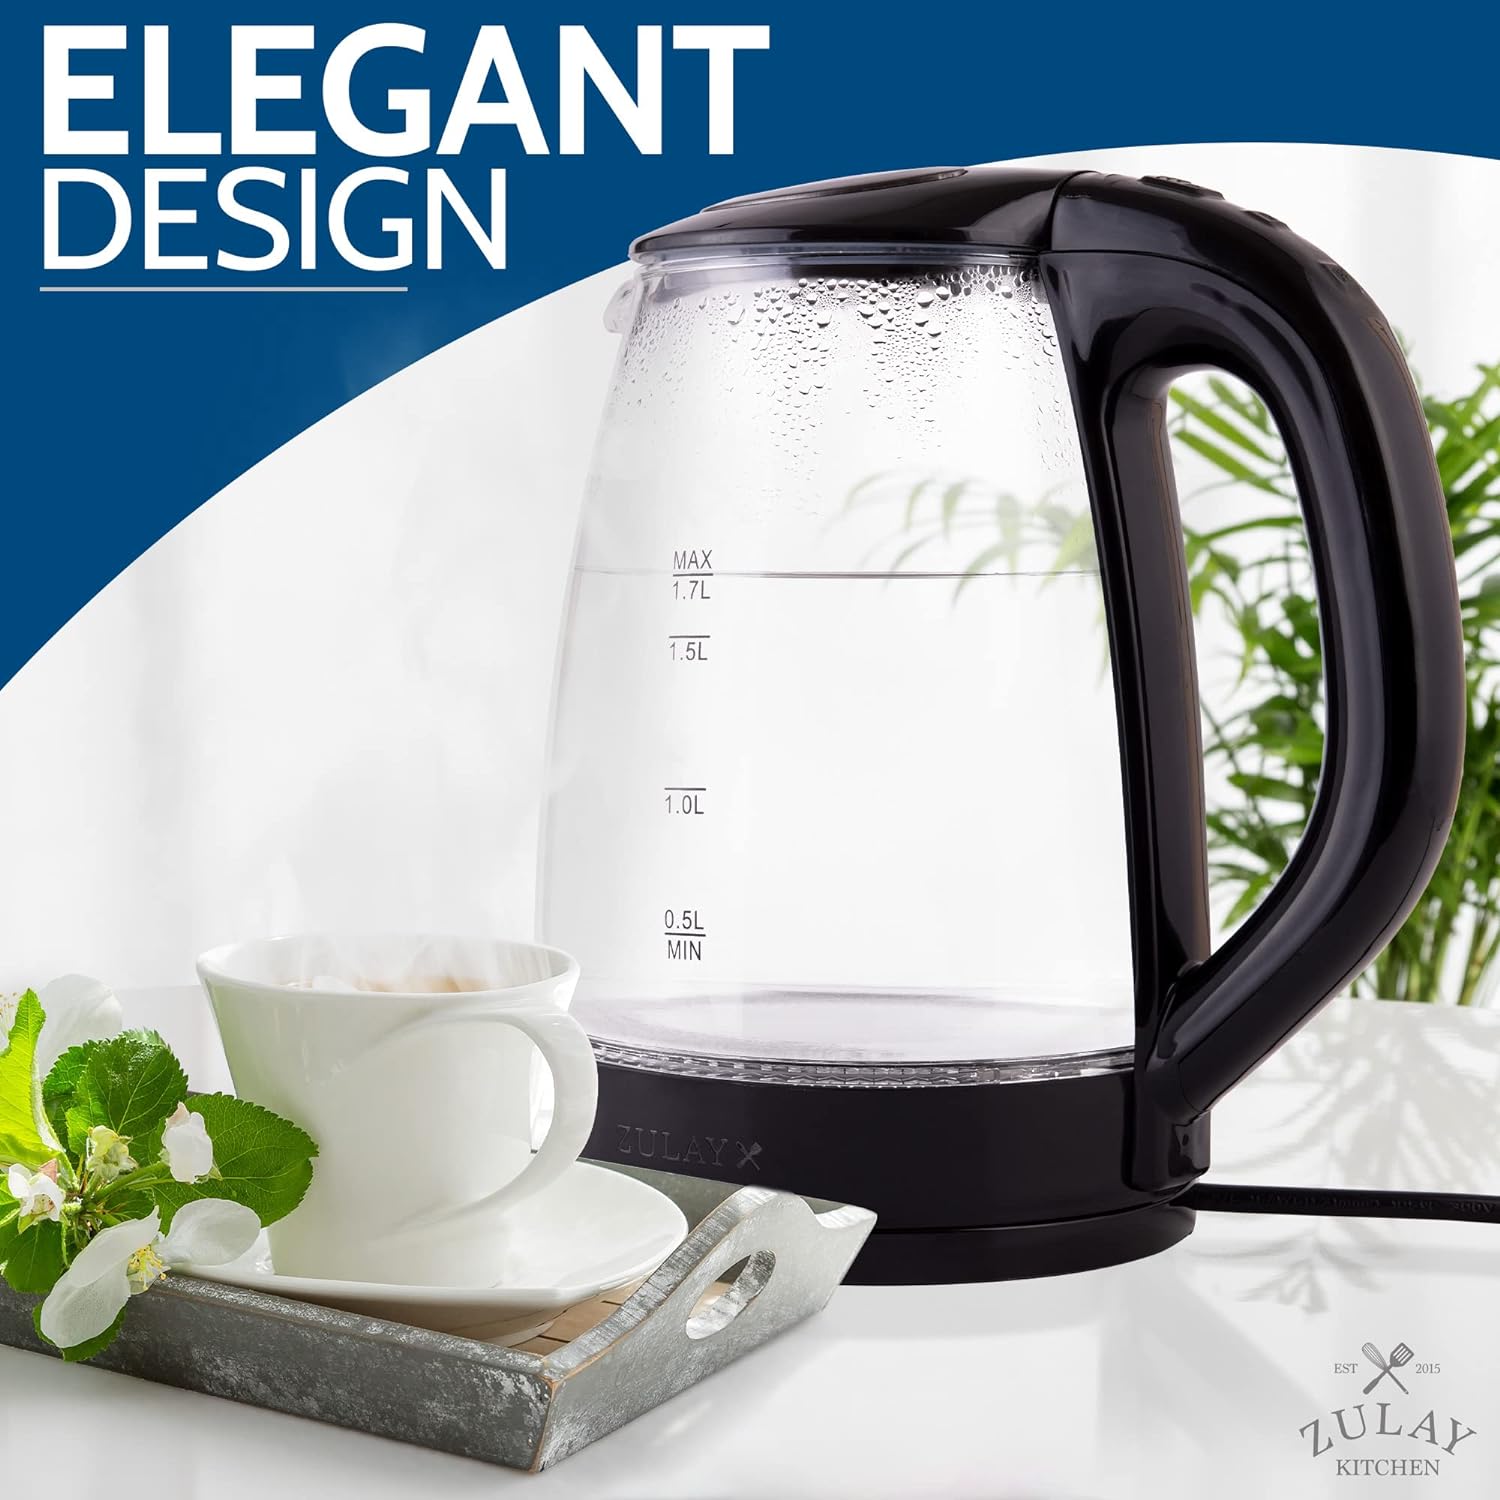 Premium quality 1.7L Glass Electric Kettle with 360° Swivel Base